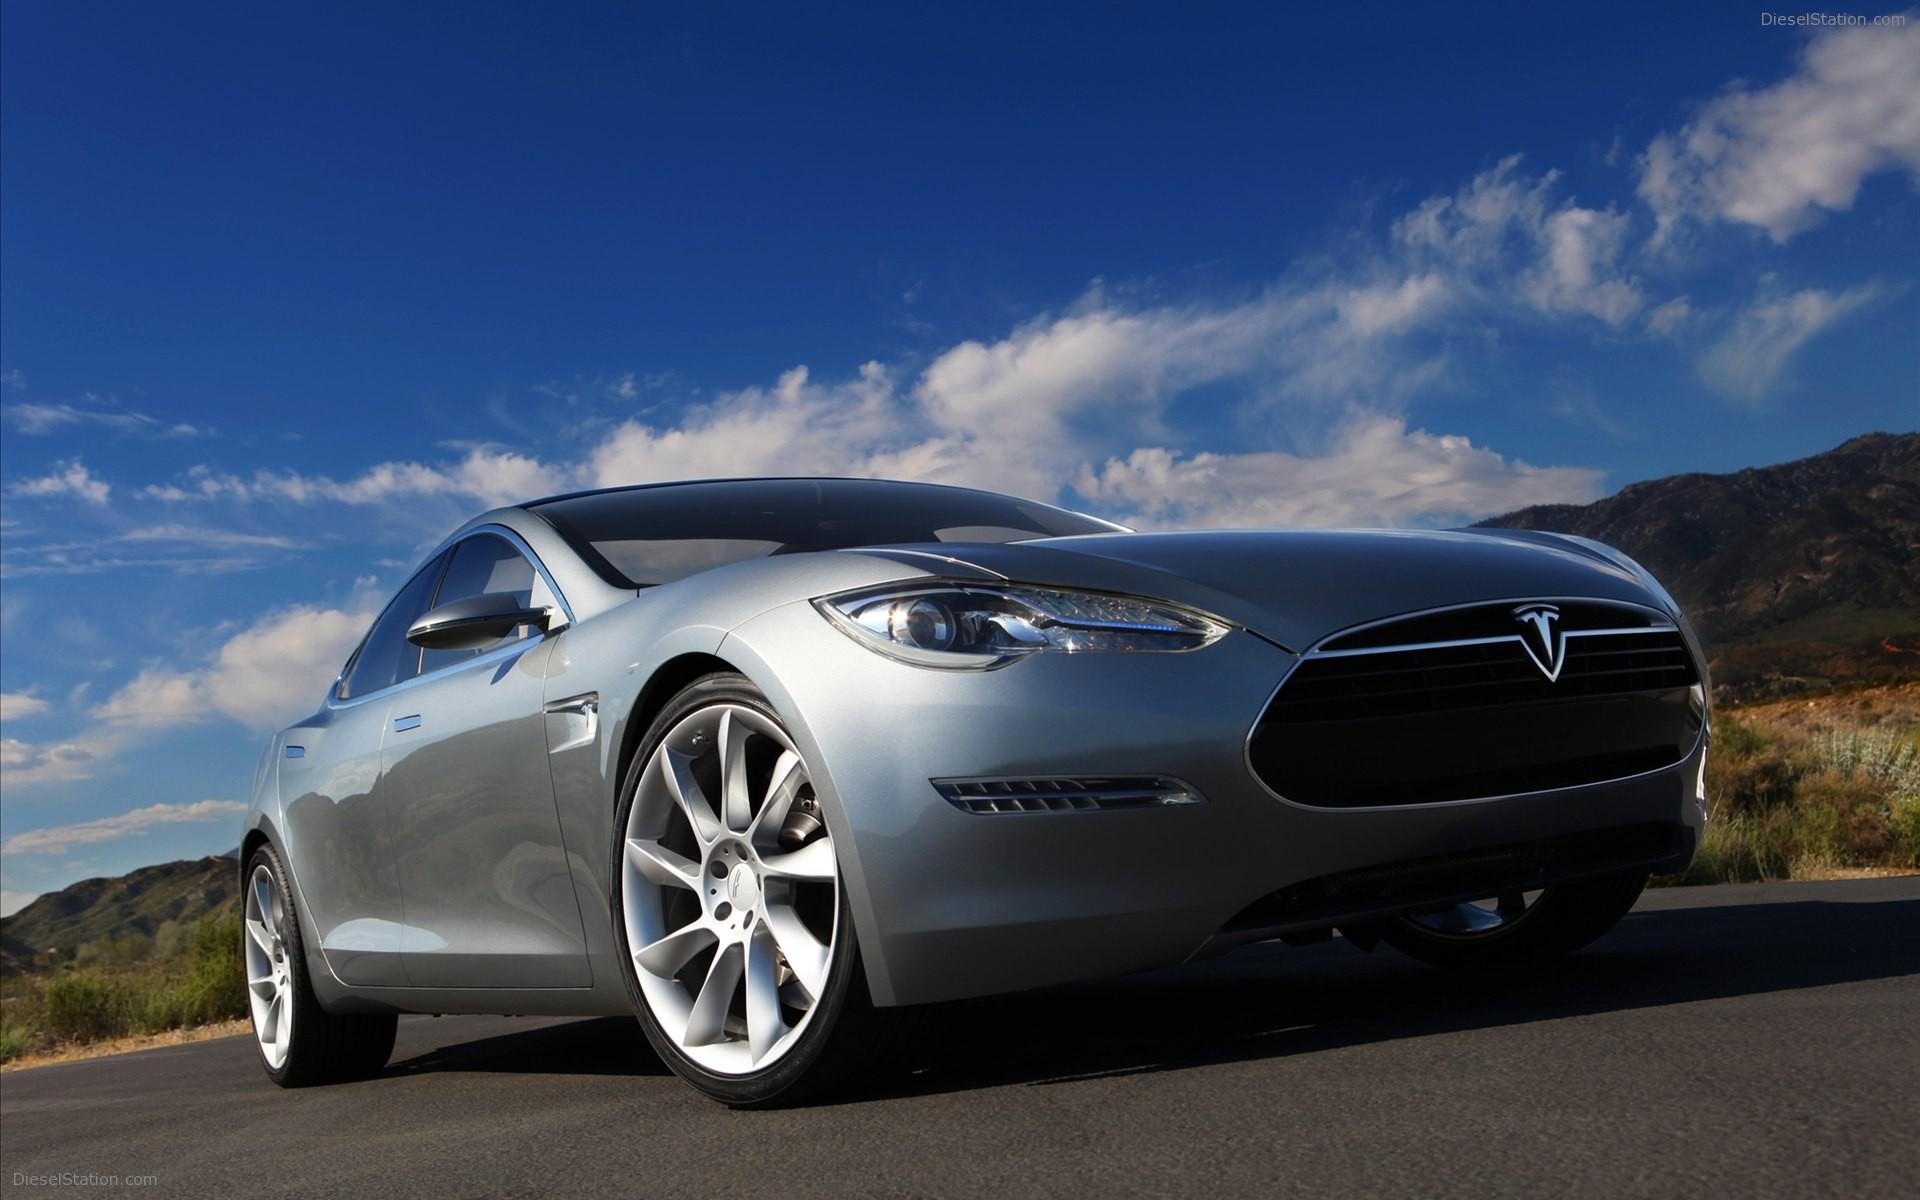 Tesla Q2 2013: 5,150 Model S sold, income up 70% and expansion ahead